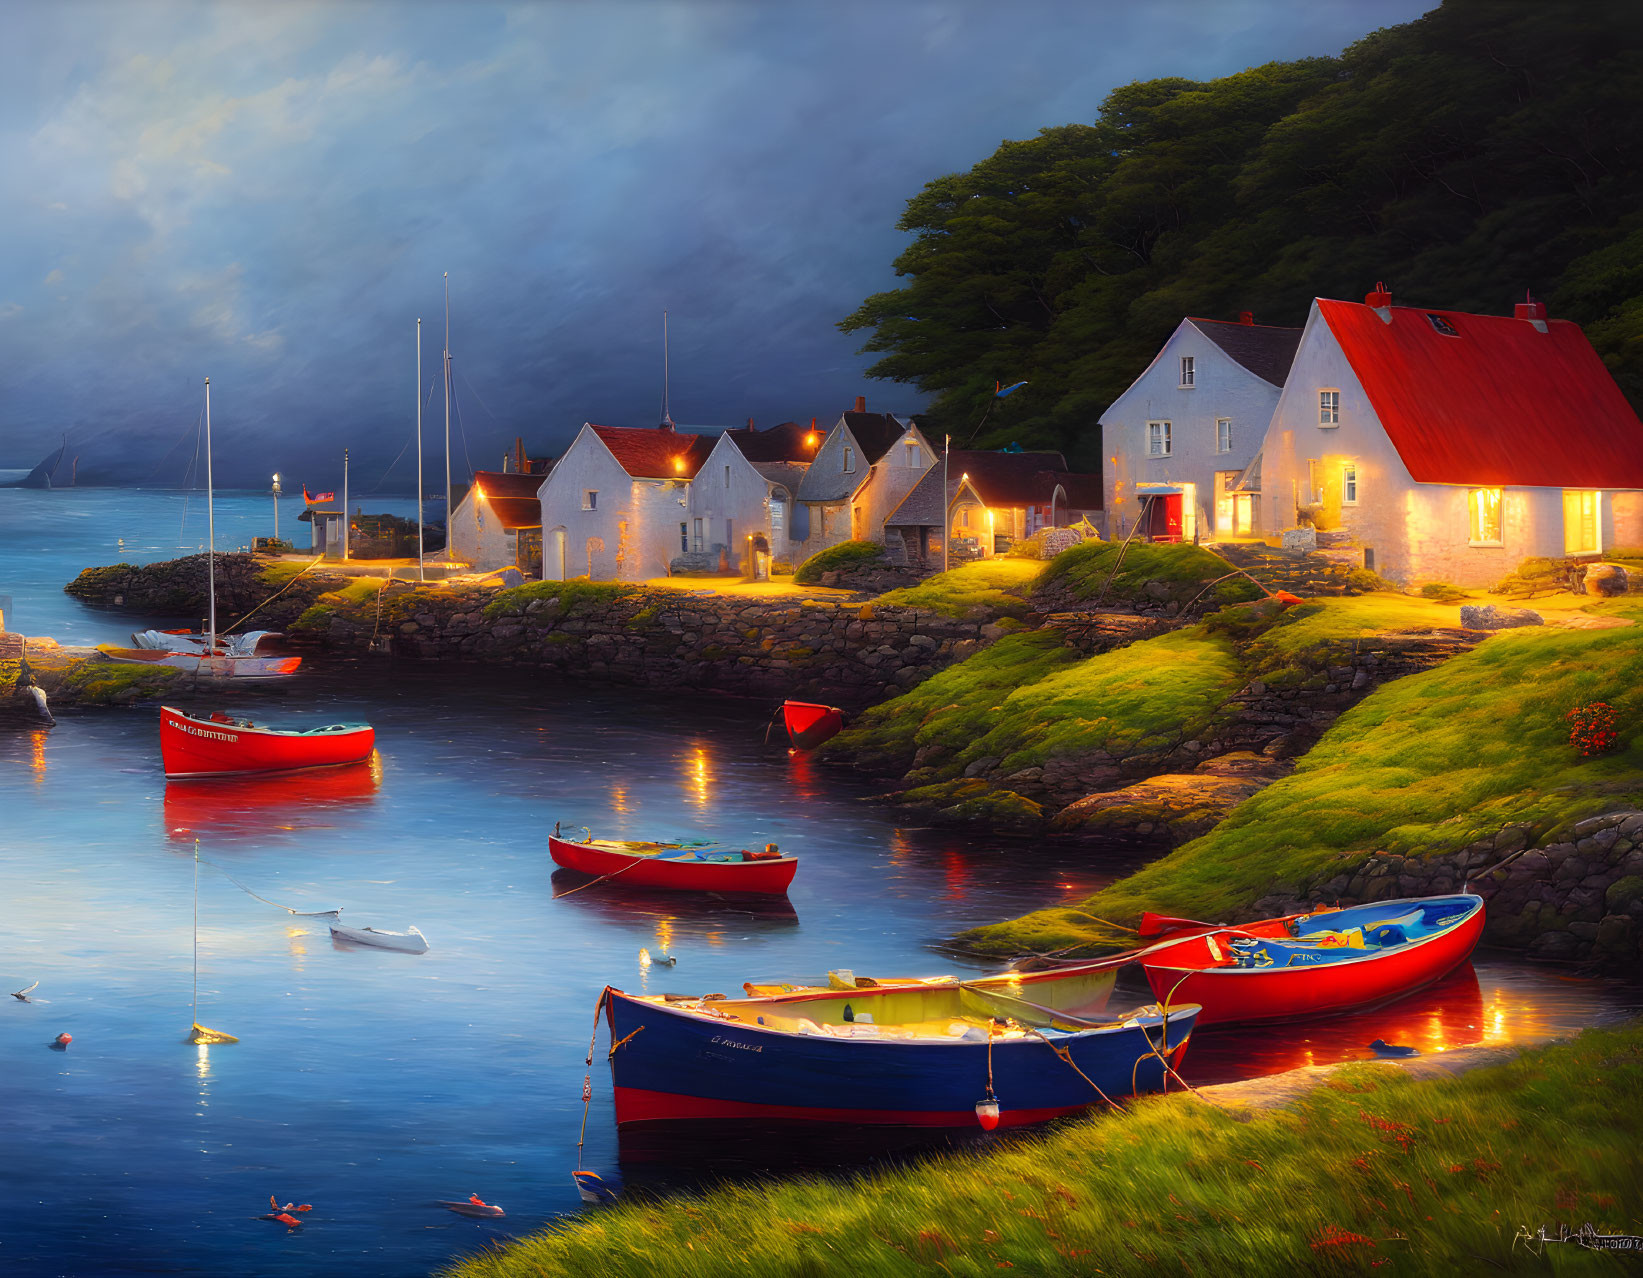 Tranquil Coastal Village with Red Boats, Glowing Houses, and Misty Mountains at D